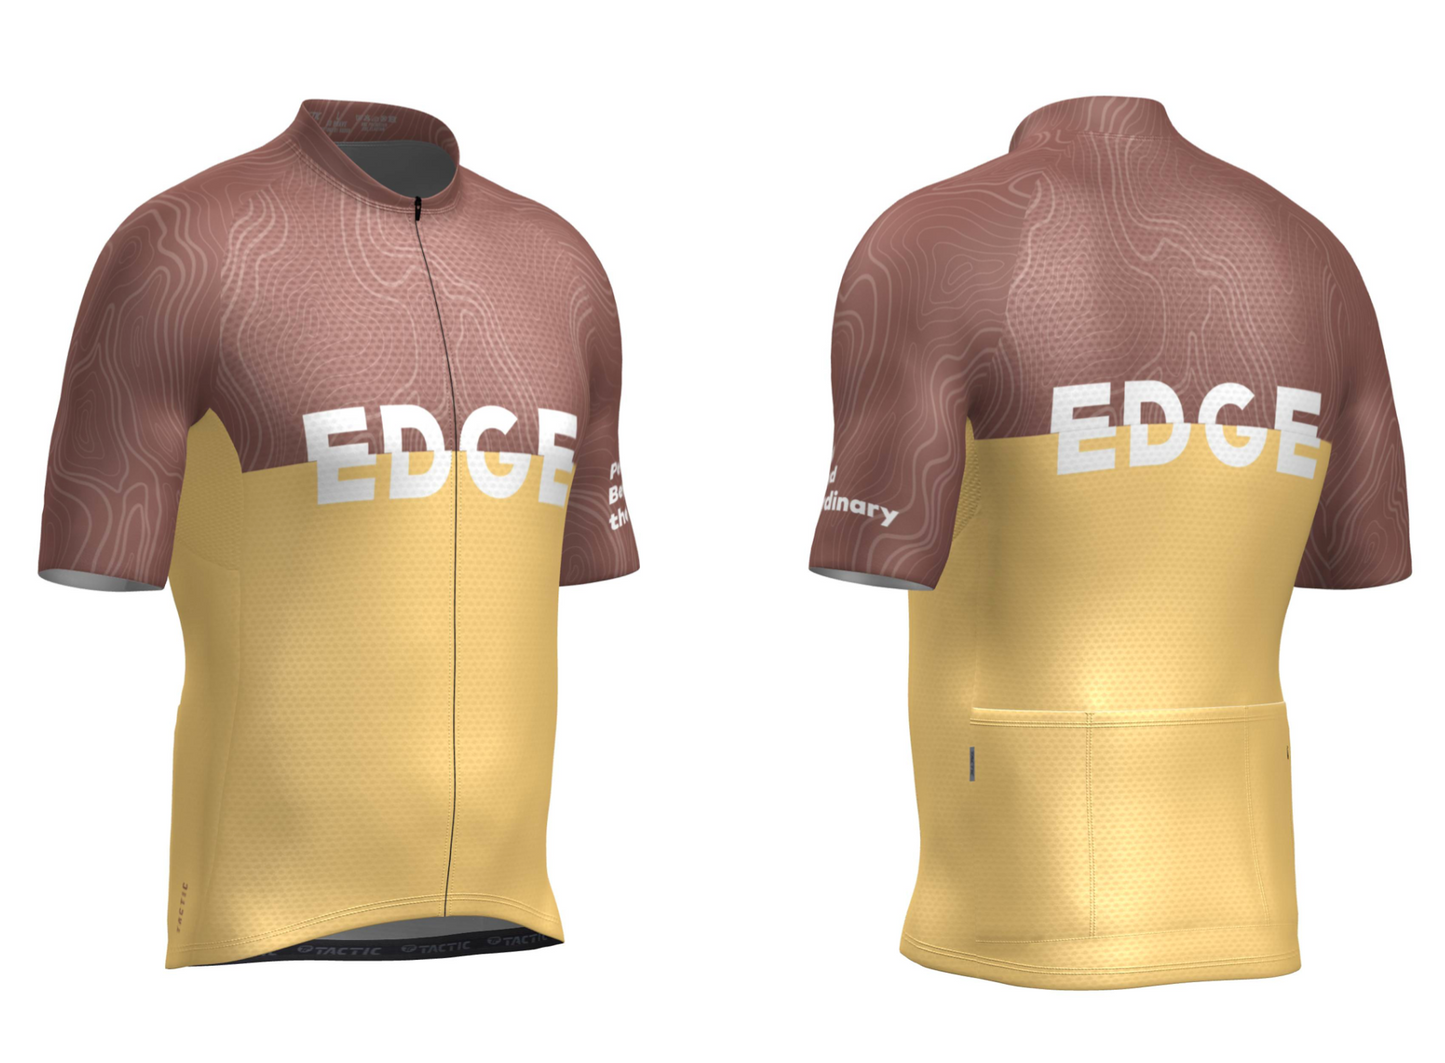 EDGE Cycling Jersey by Tactic Sports